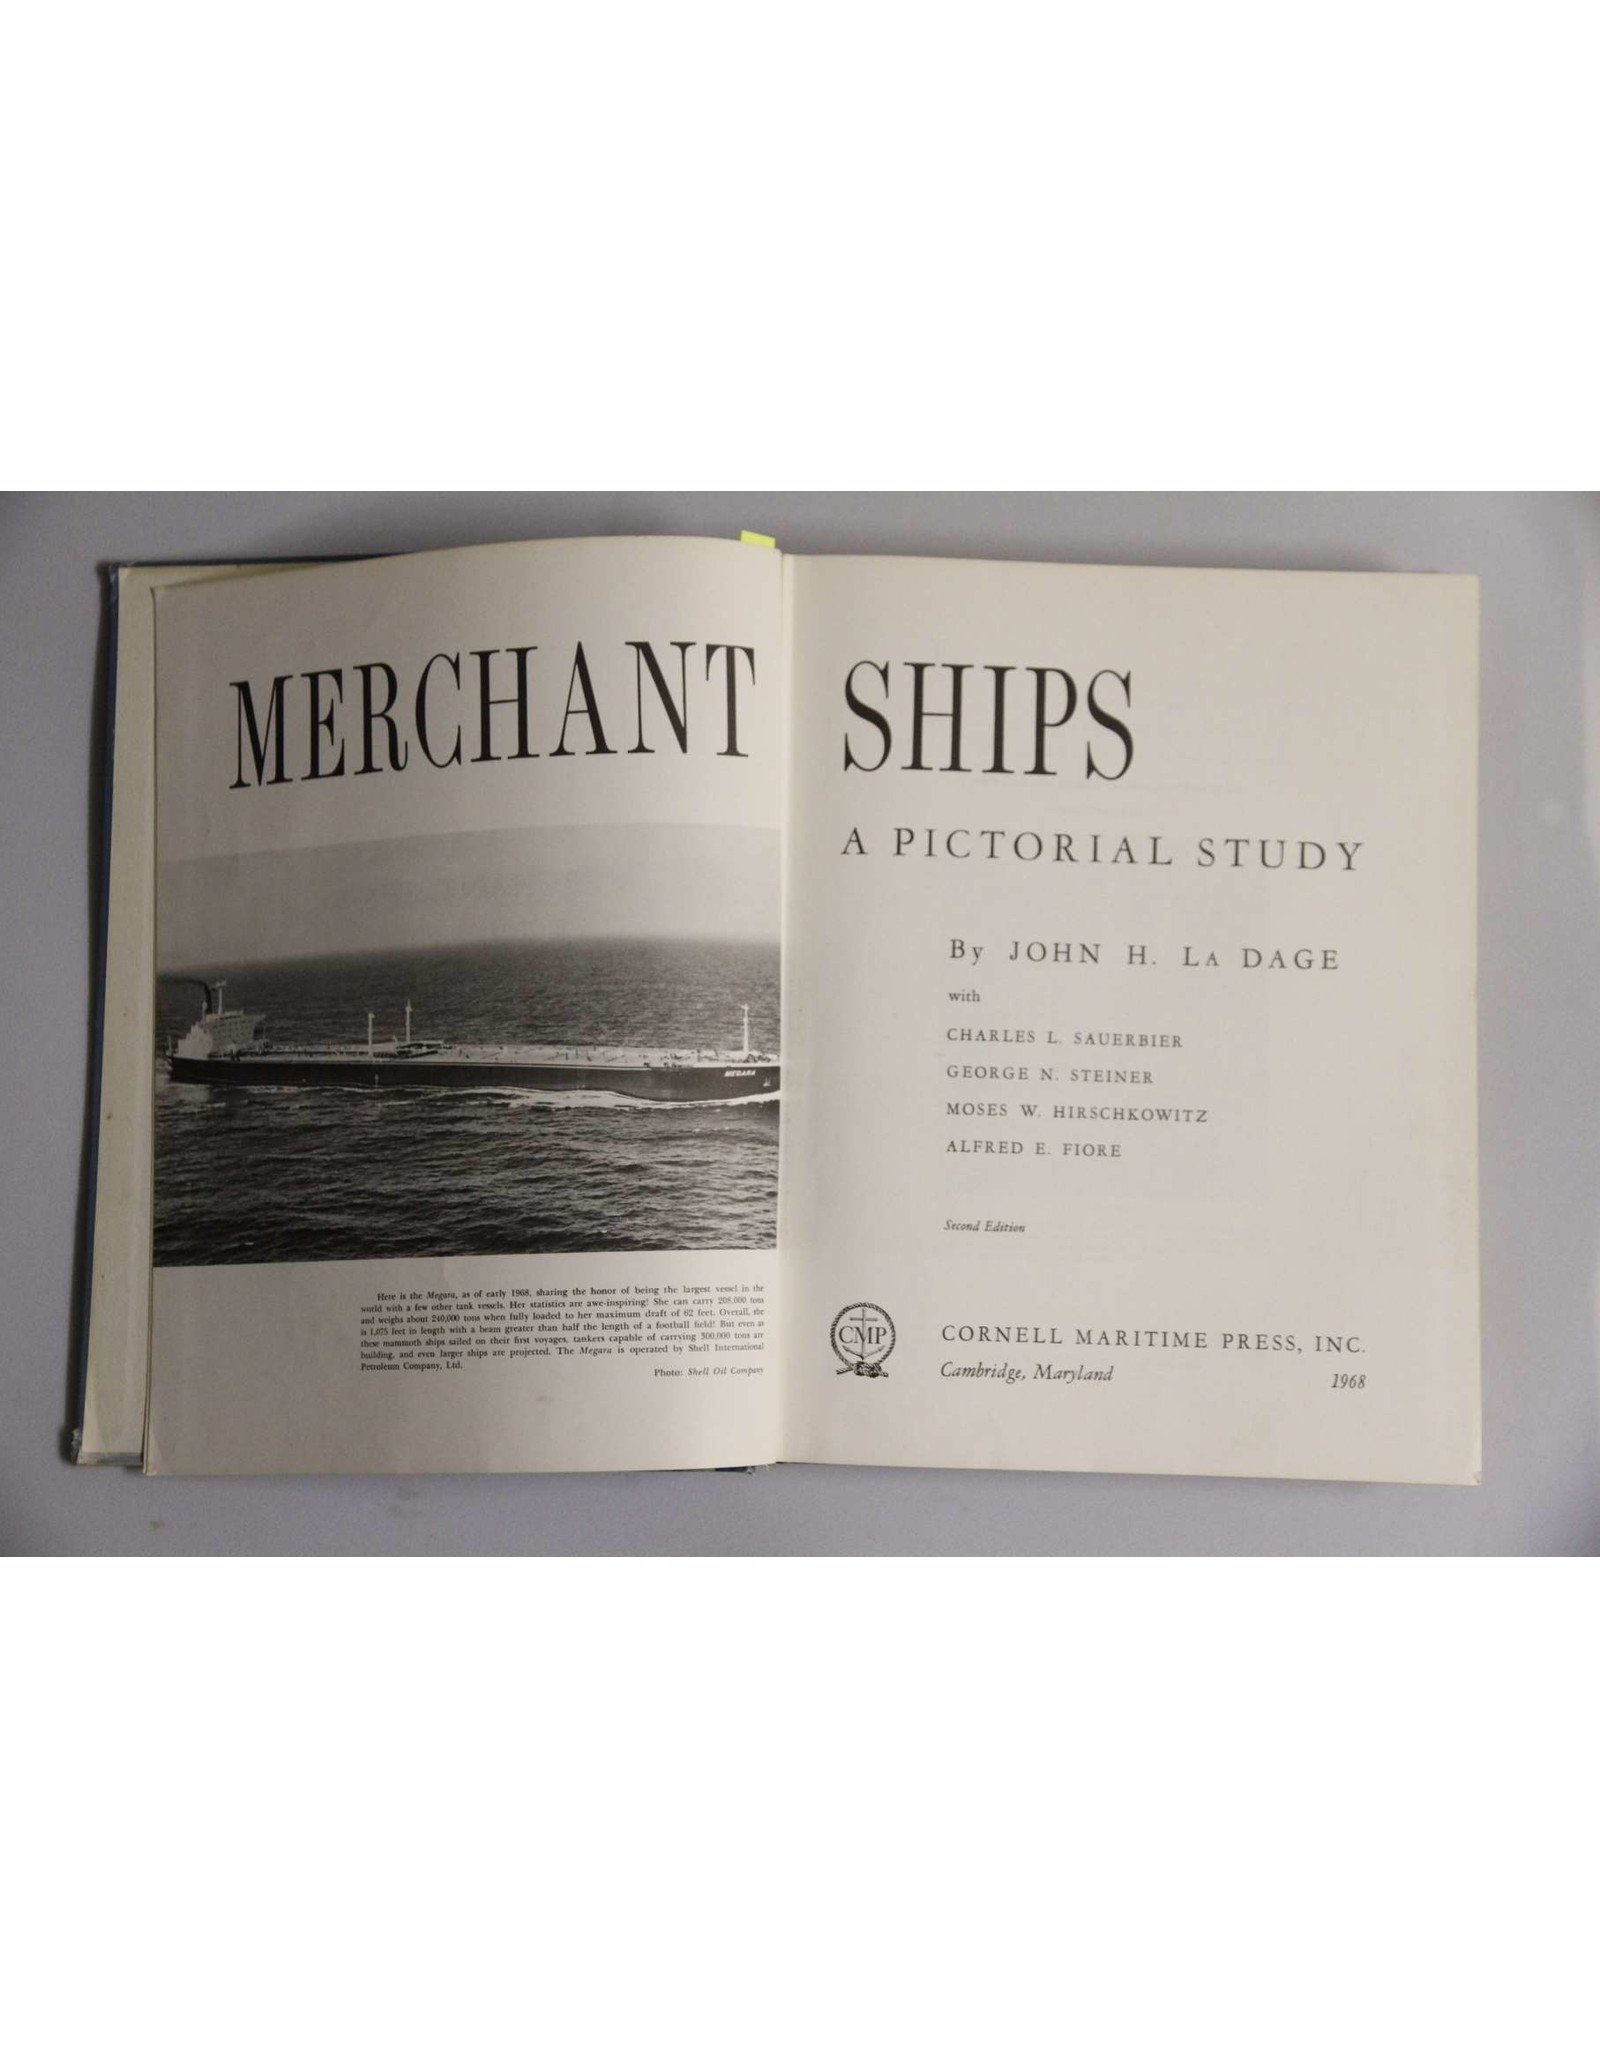 Hardcover book - Merchant Ships: A Pictorial study by Ladage, 1968